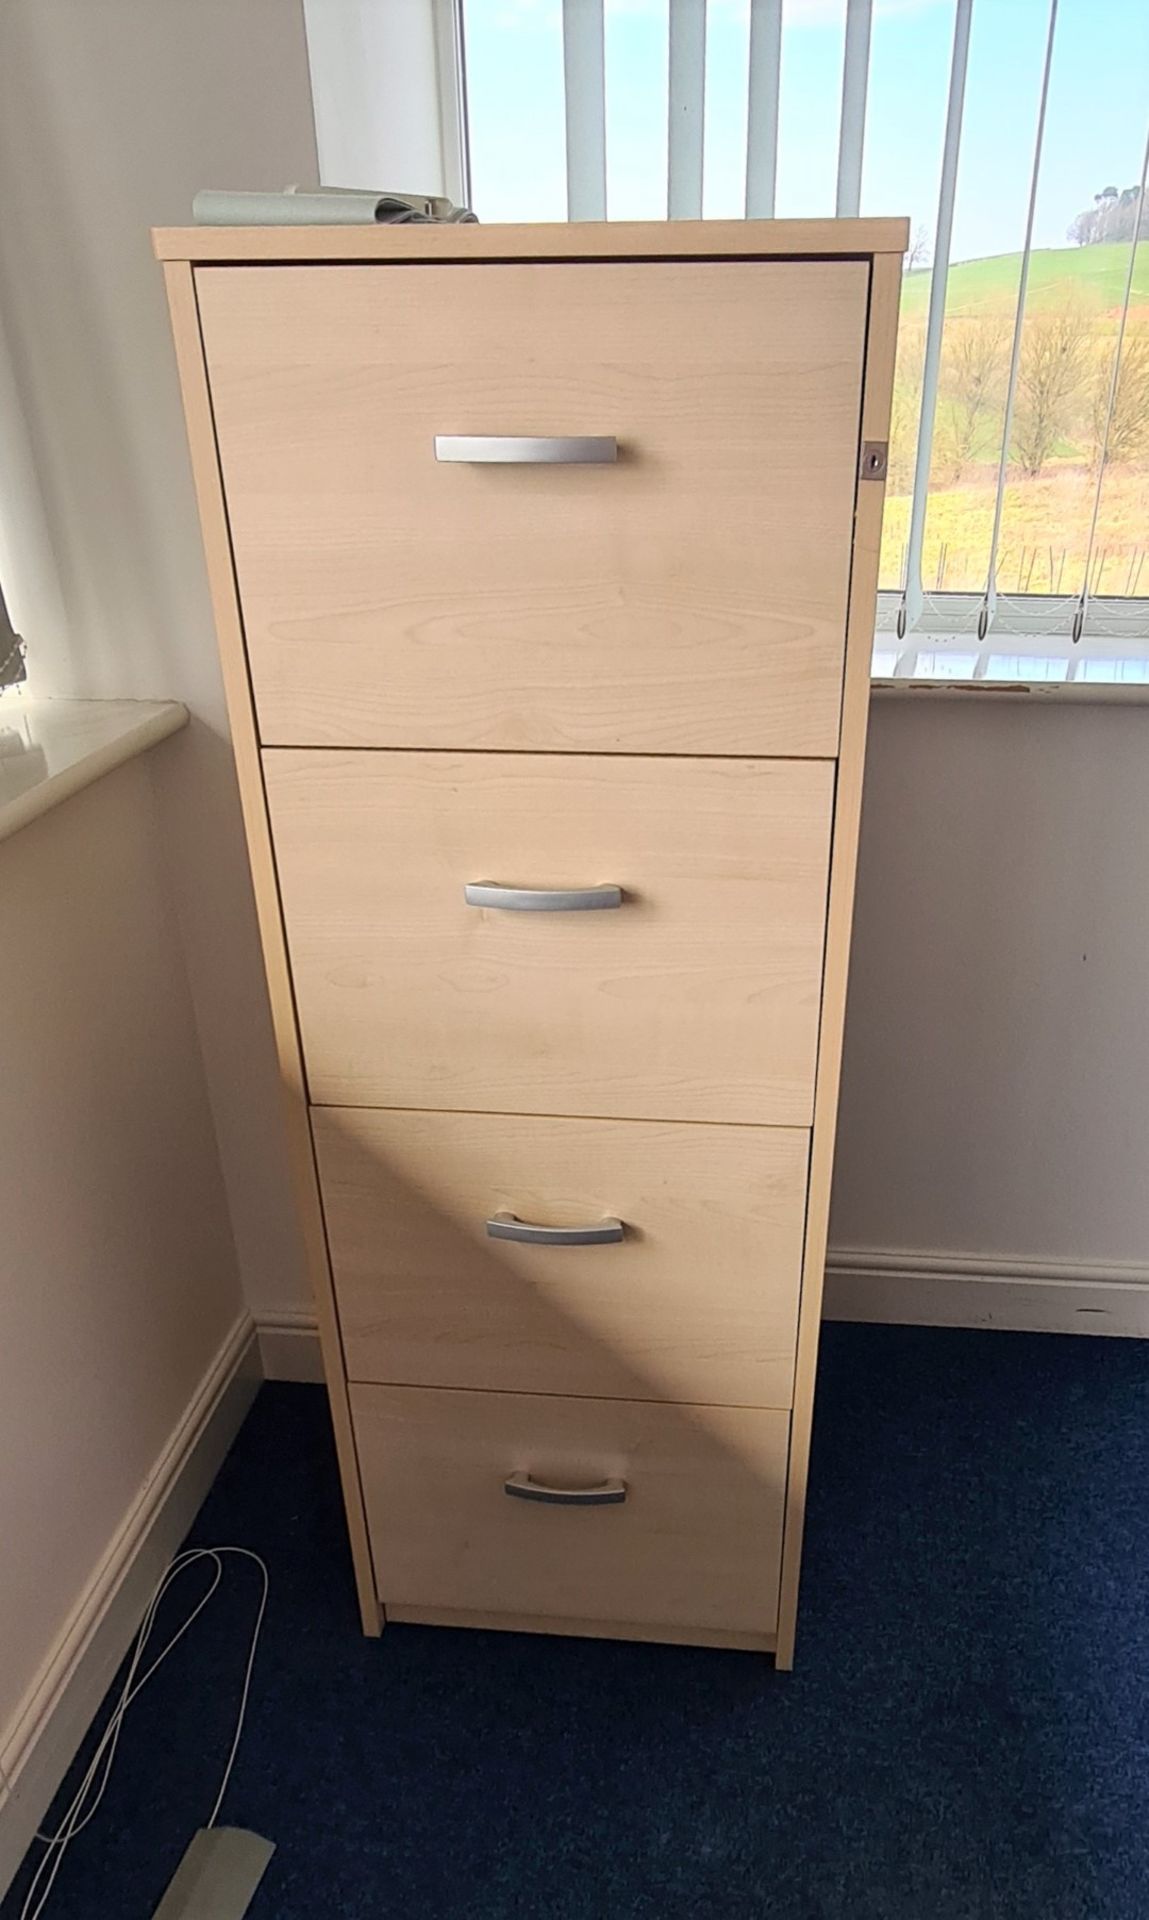 1 x Office Four Drawer Filing Cabinet With a Birch Finish - Ref: 1 x PK018 - Location: Site 2,